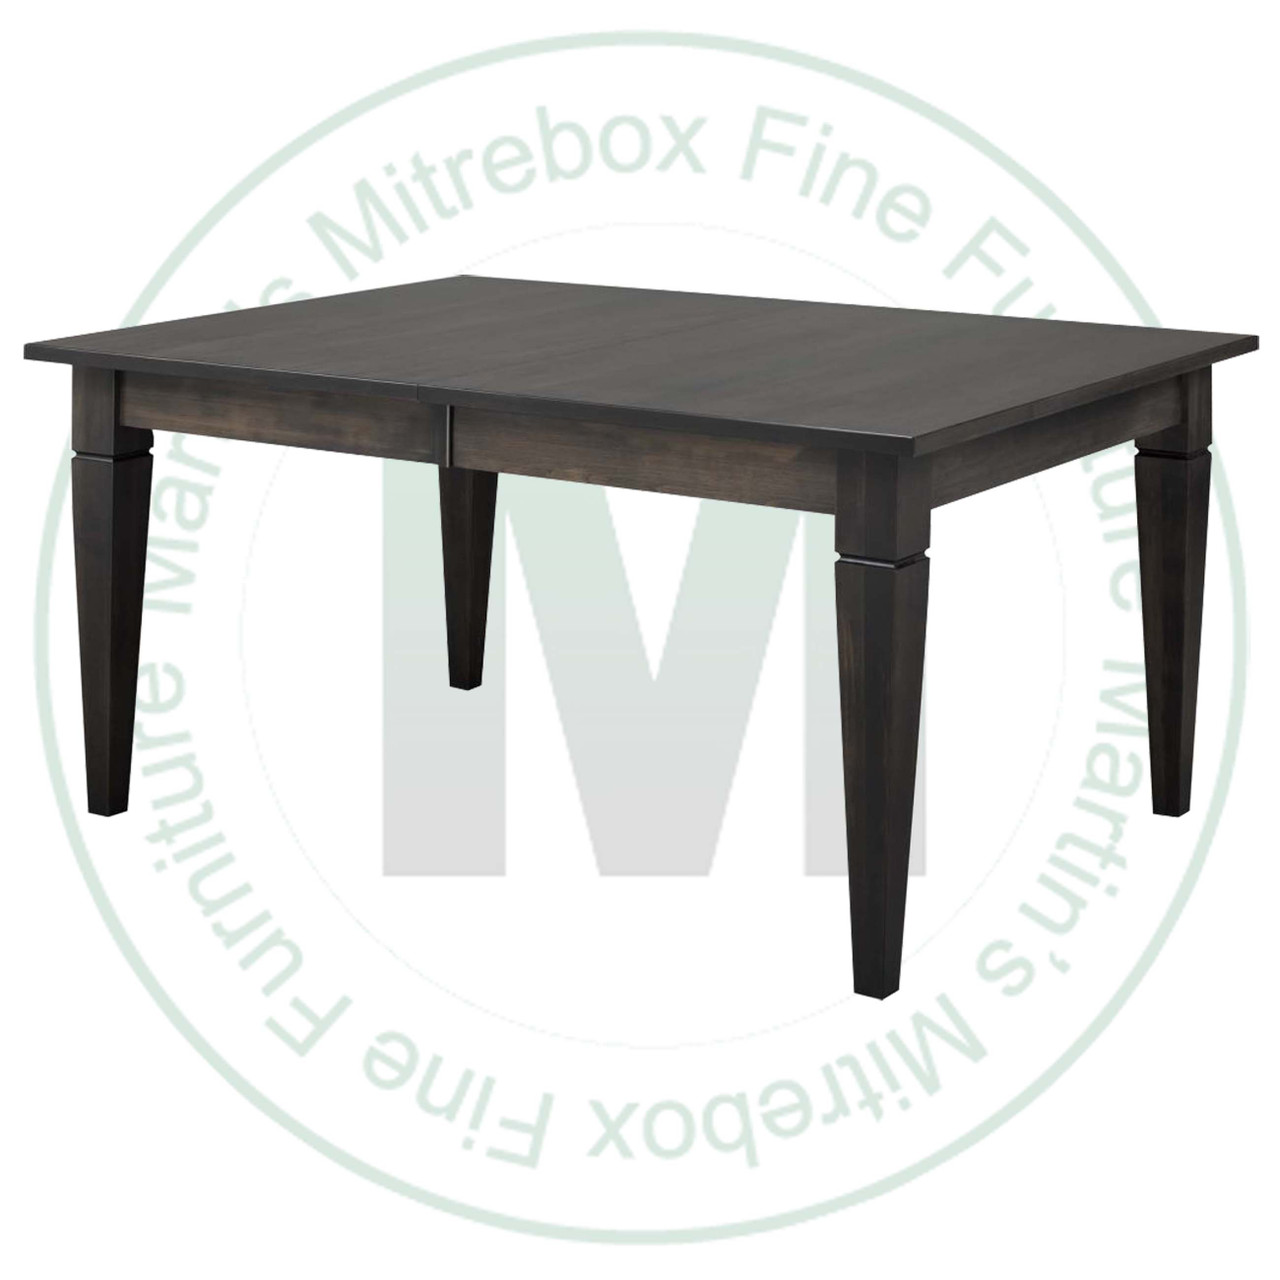 Maple Reesor Solid Top Harvest Table 48''D x 96''W x 30''H Table Has 1'' Thick Top And 2 - 16'' Extensions